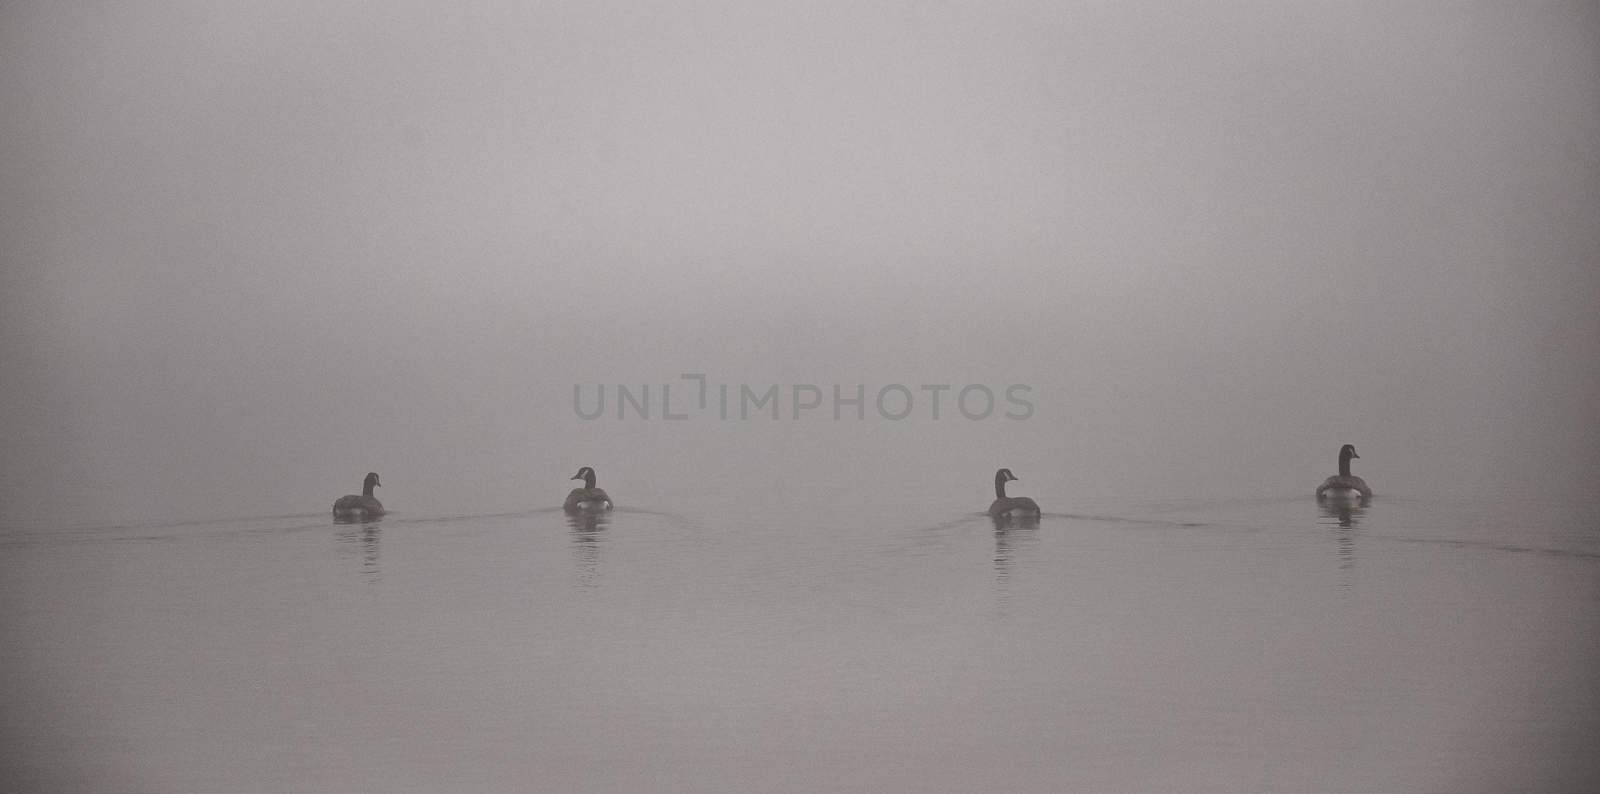 A gaggle of Canadian geese  navigating a heavy November fog and waters on their way south.